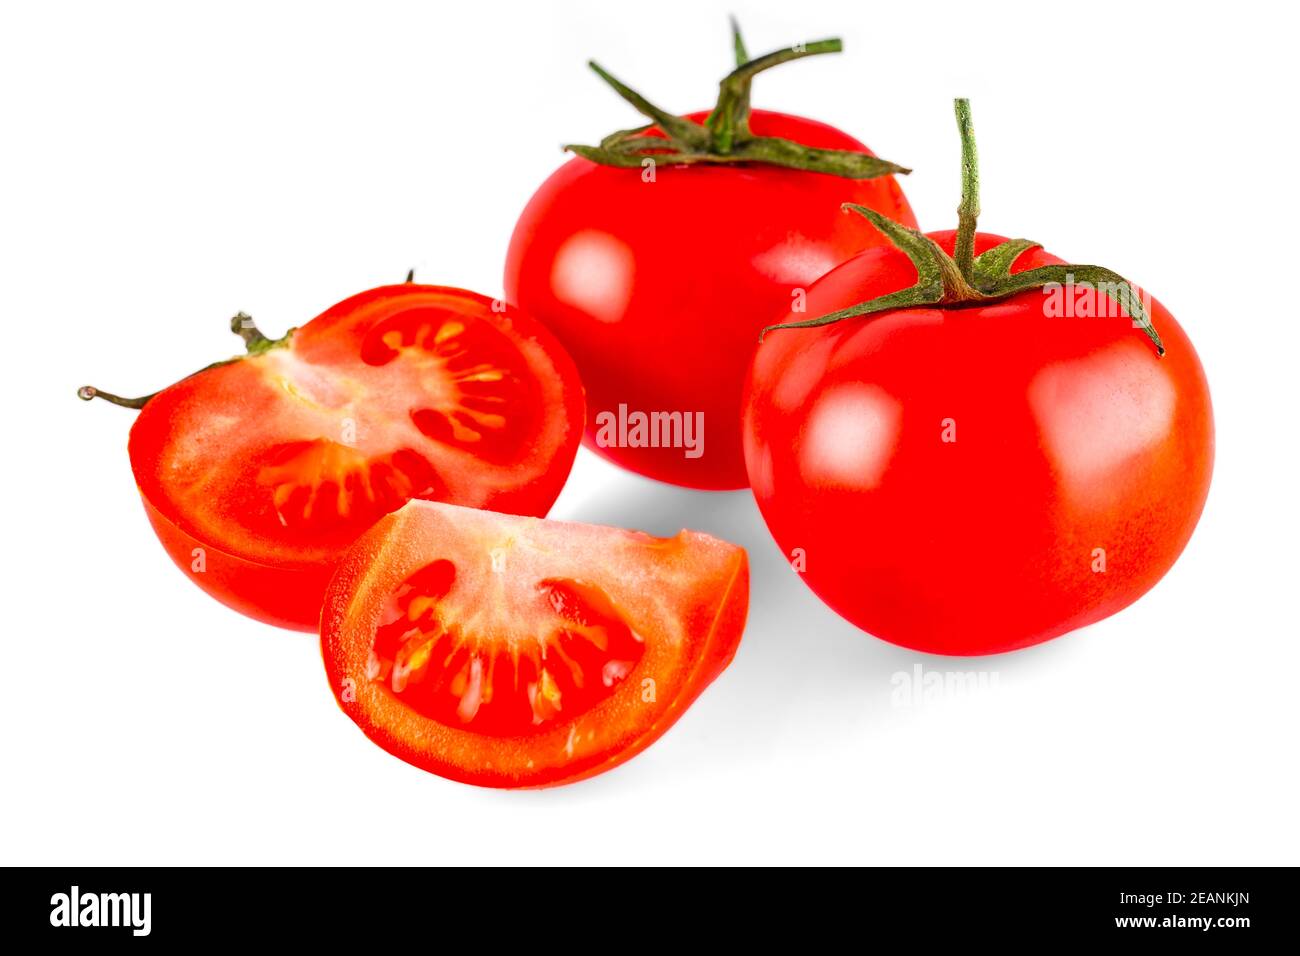 The Fresh Tomatoes isolated on white backgrond Stock Photo